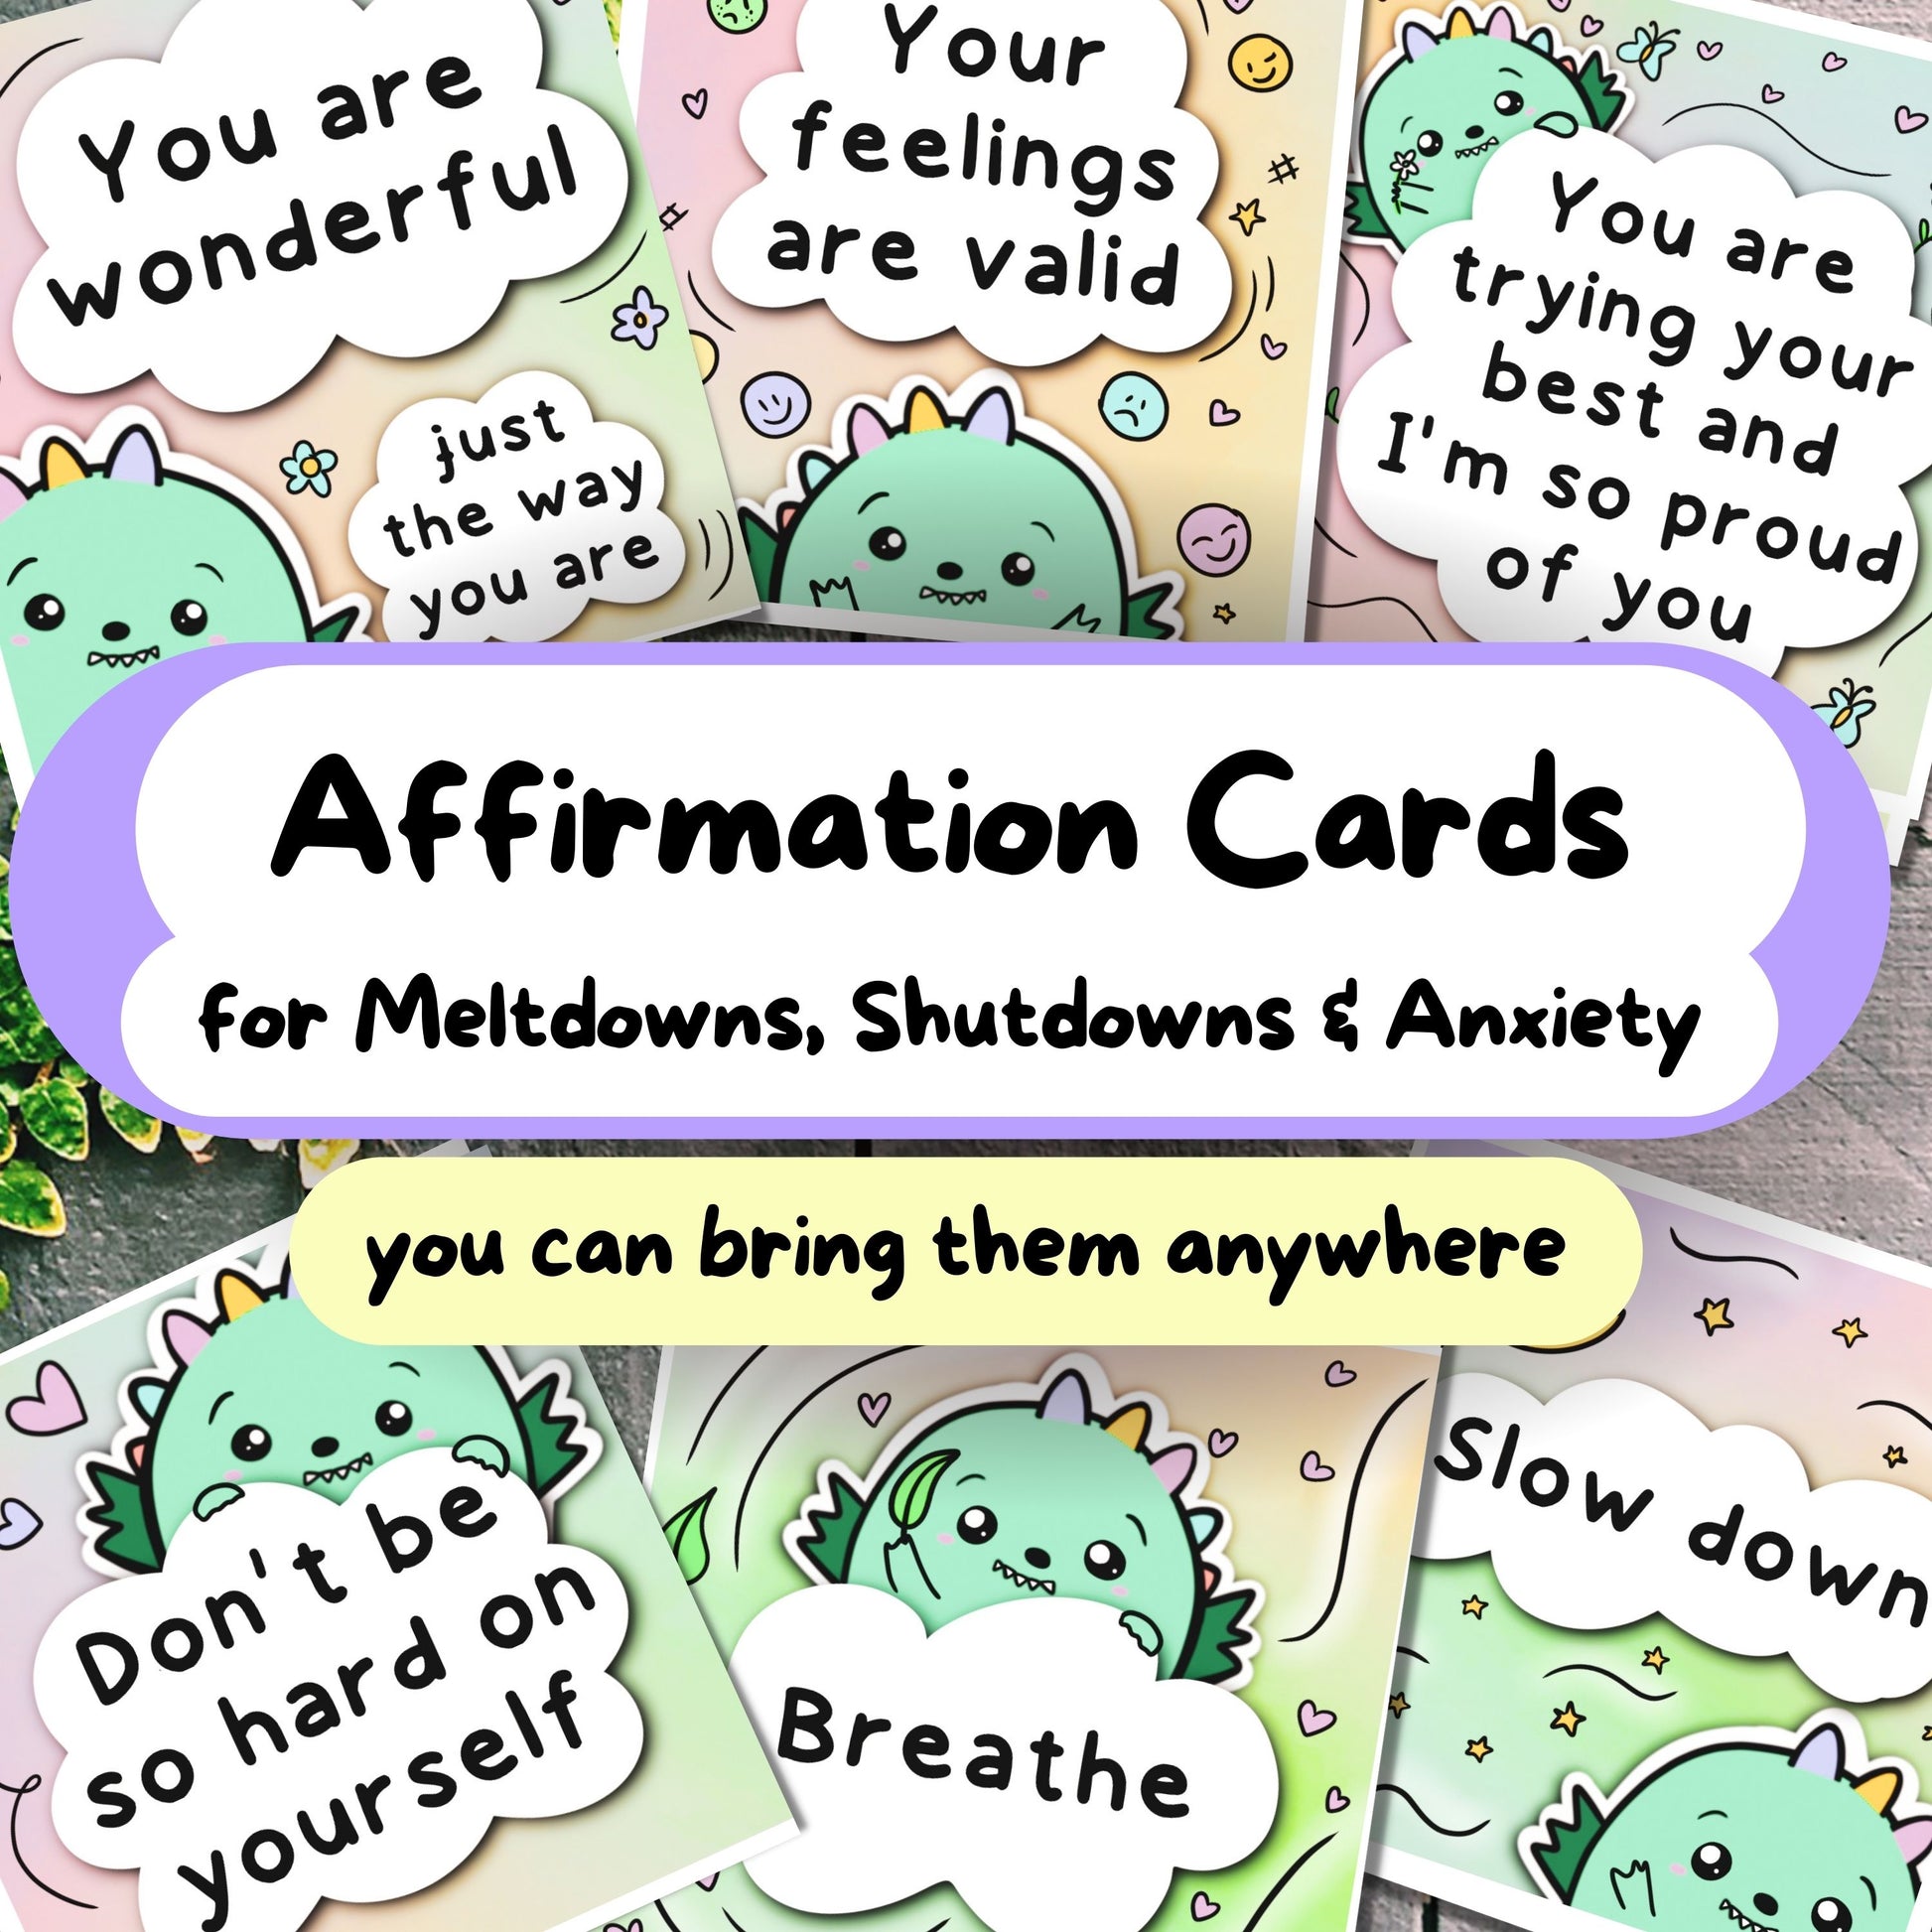 Dinosaur Affirmation cards for meltdowns, shutdowns, anxiety and more